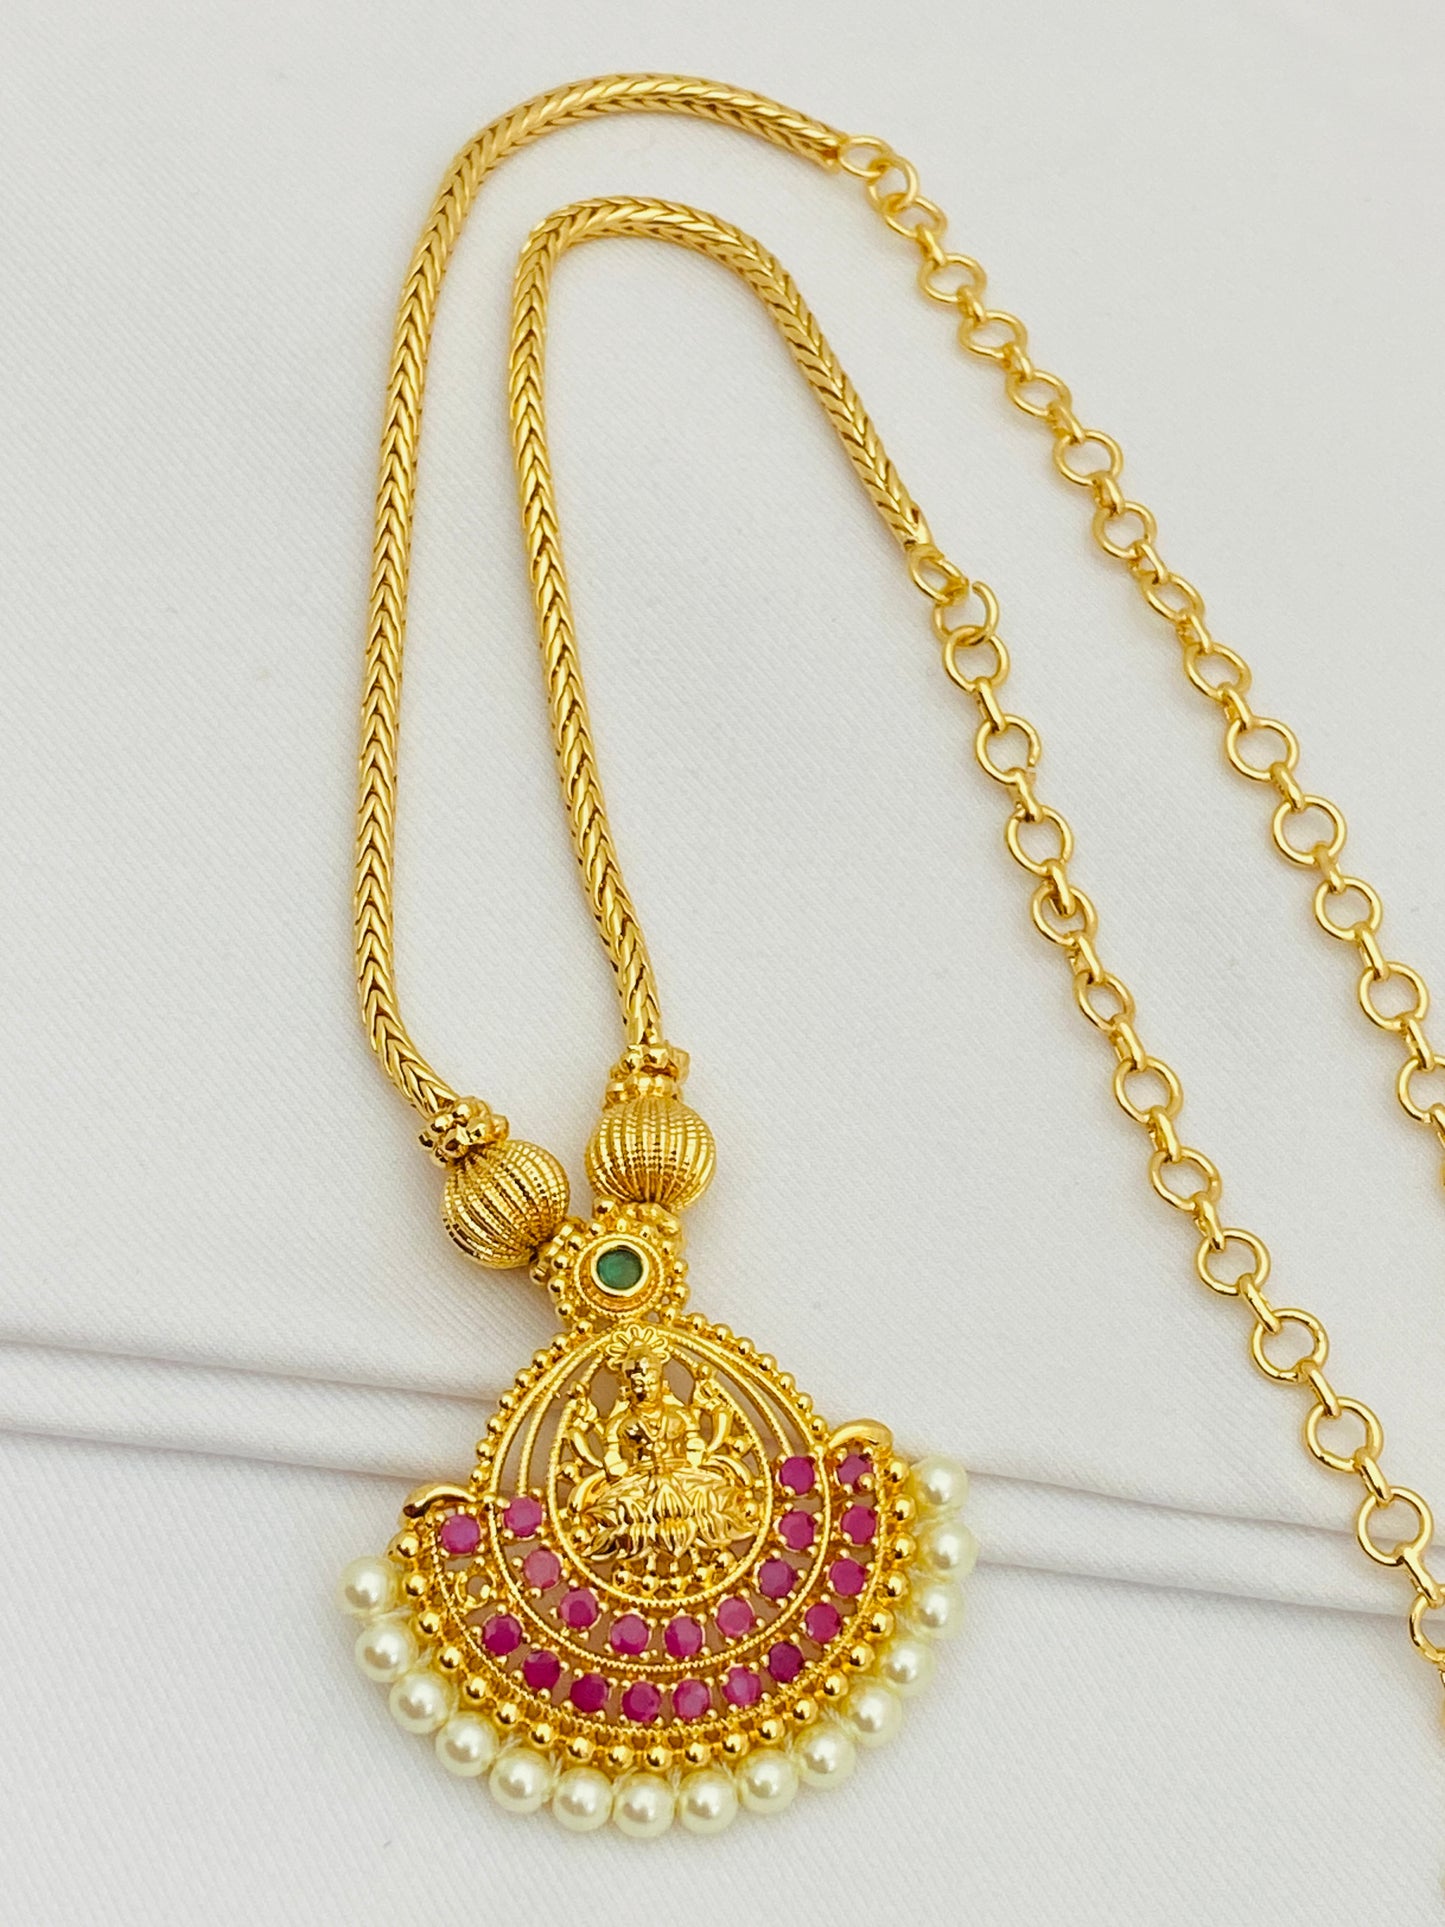 Lovely Multi Colored Long Chain With Pearls And Lakshmi Pendant